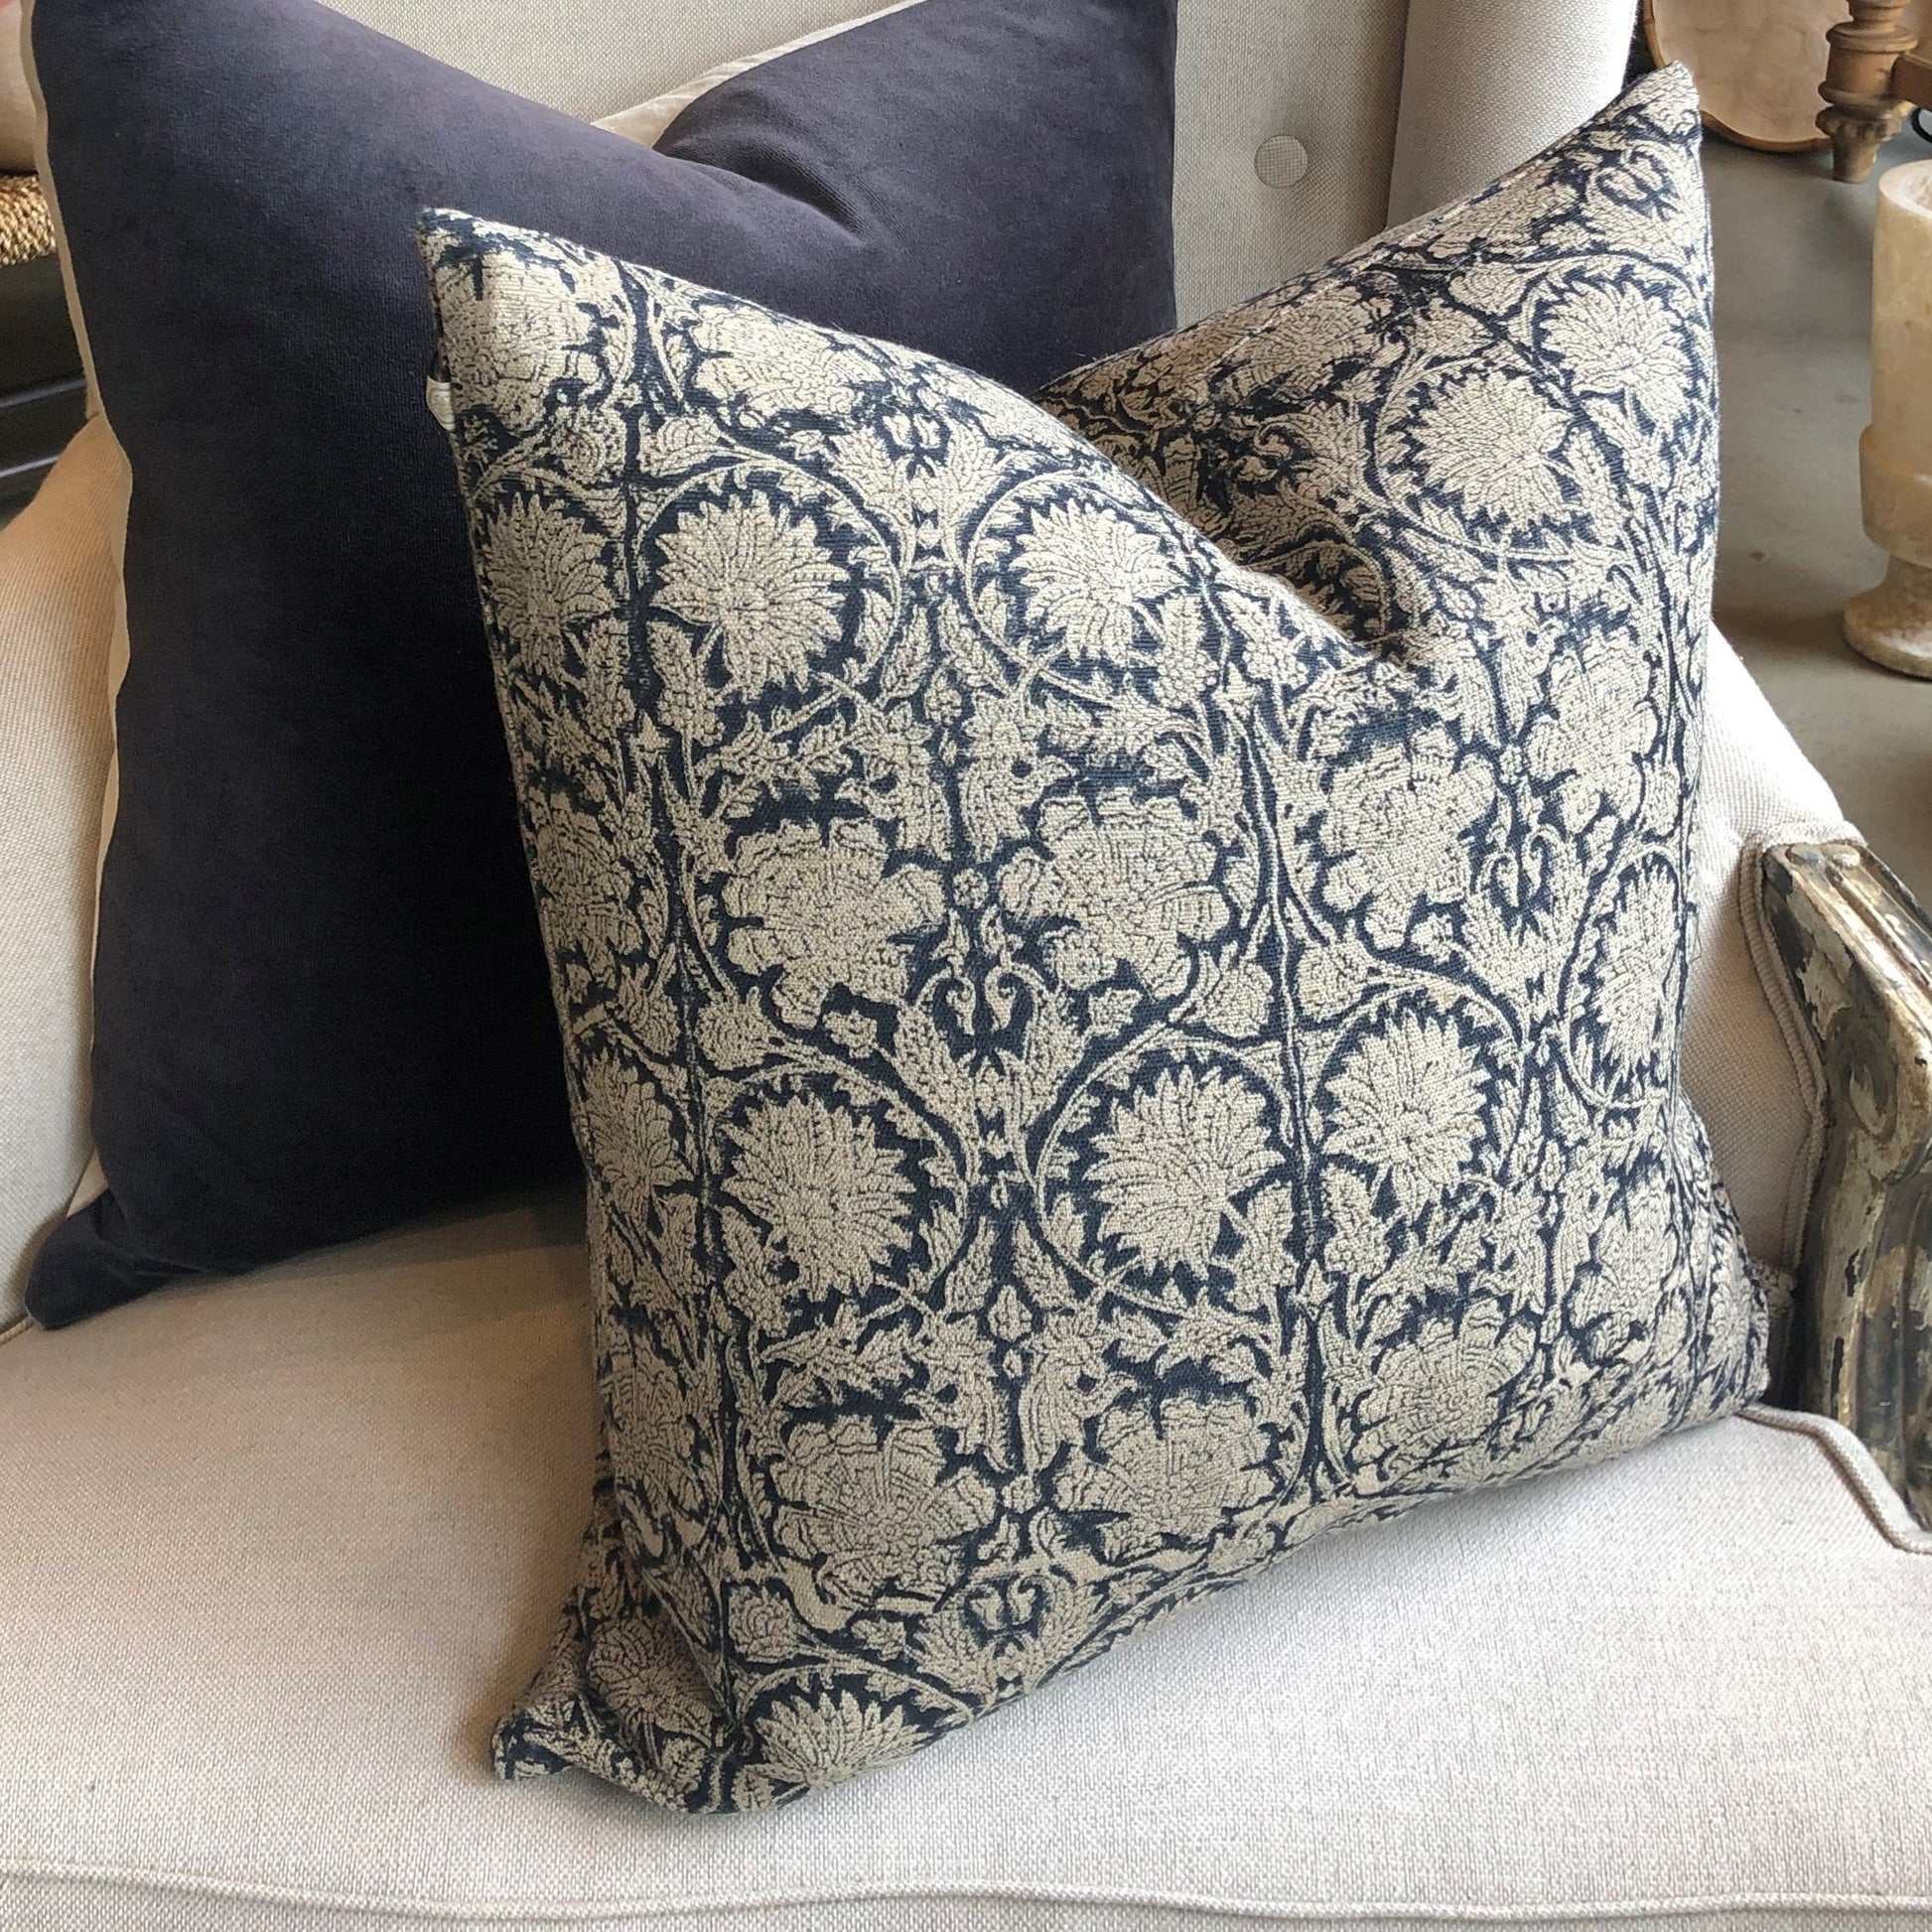 Introducing the Paradise Linen Dark Blue Cushion crafted by Chamois, a renowned Swedish interior and fashion brand. This stunning addition to your home decor features a traditional Indian block print in a dark blue and natural hue pattern, and is made with 100% Belgian Linen for its superior quality and durability. To ensure maximum comfort, a quality feather insert is also included.